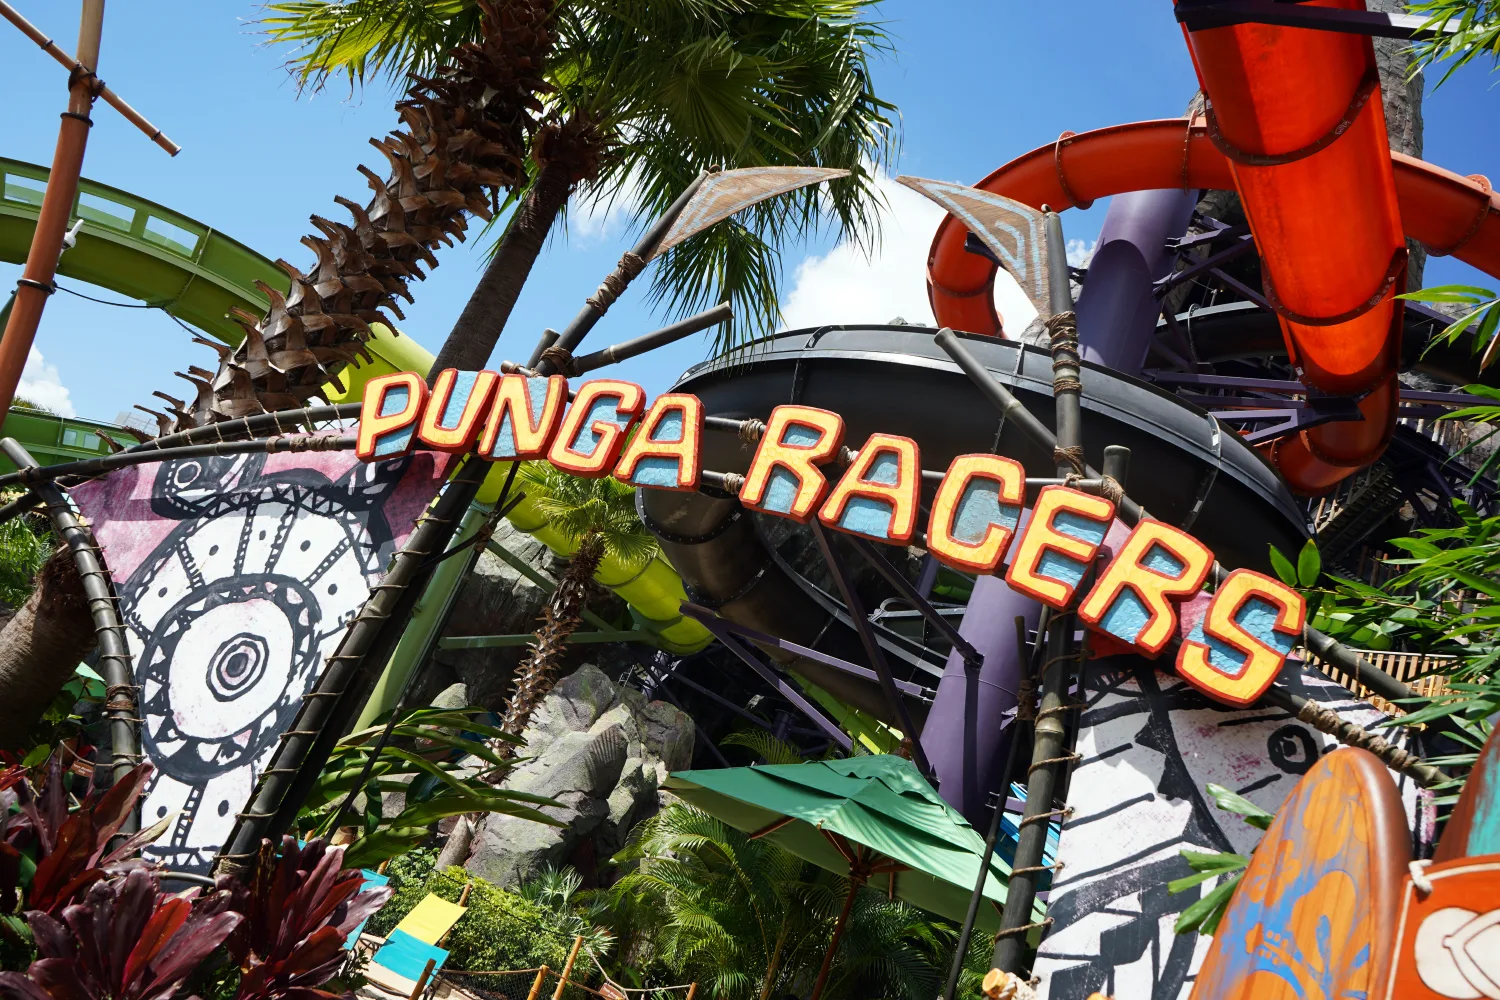 Punga Racers reopens at Volcano Bay as body slide after lengthy refurbishment